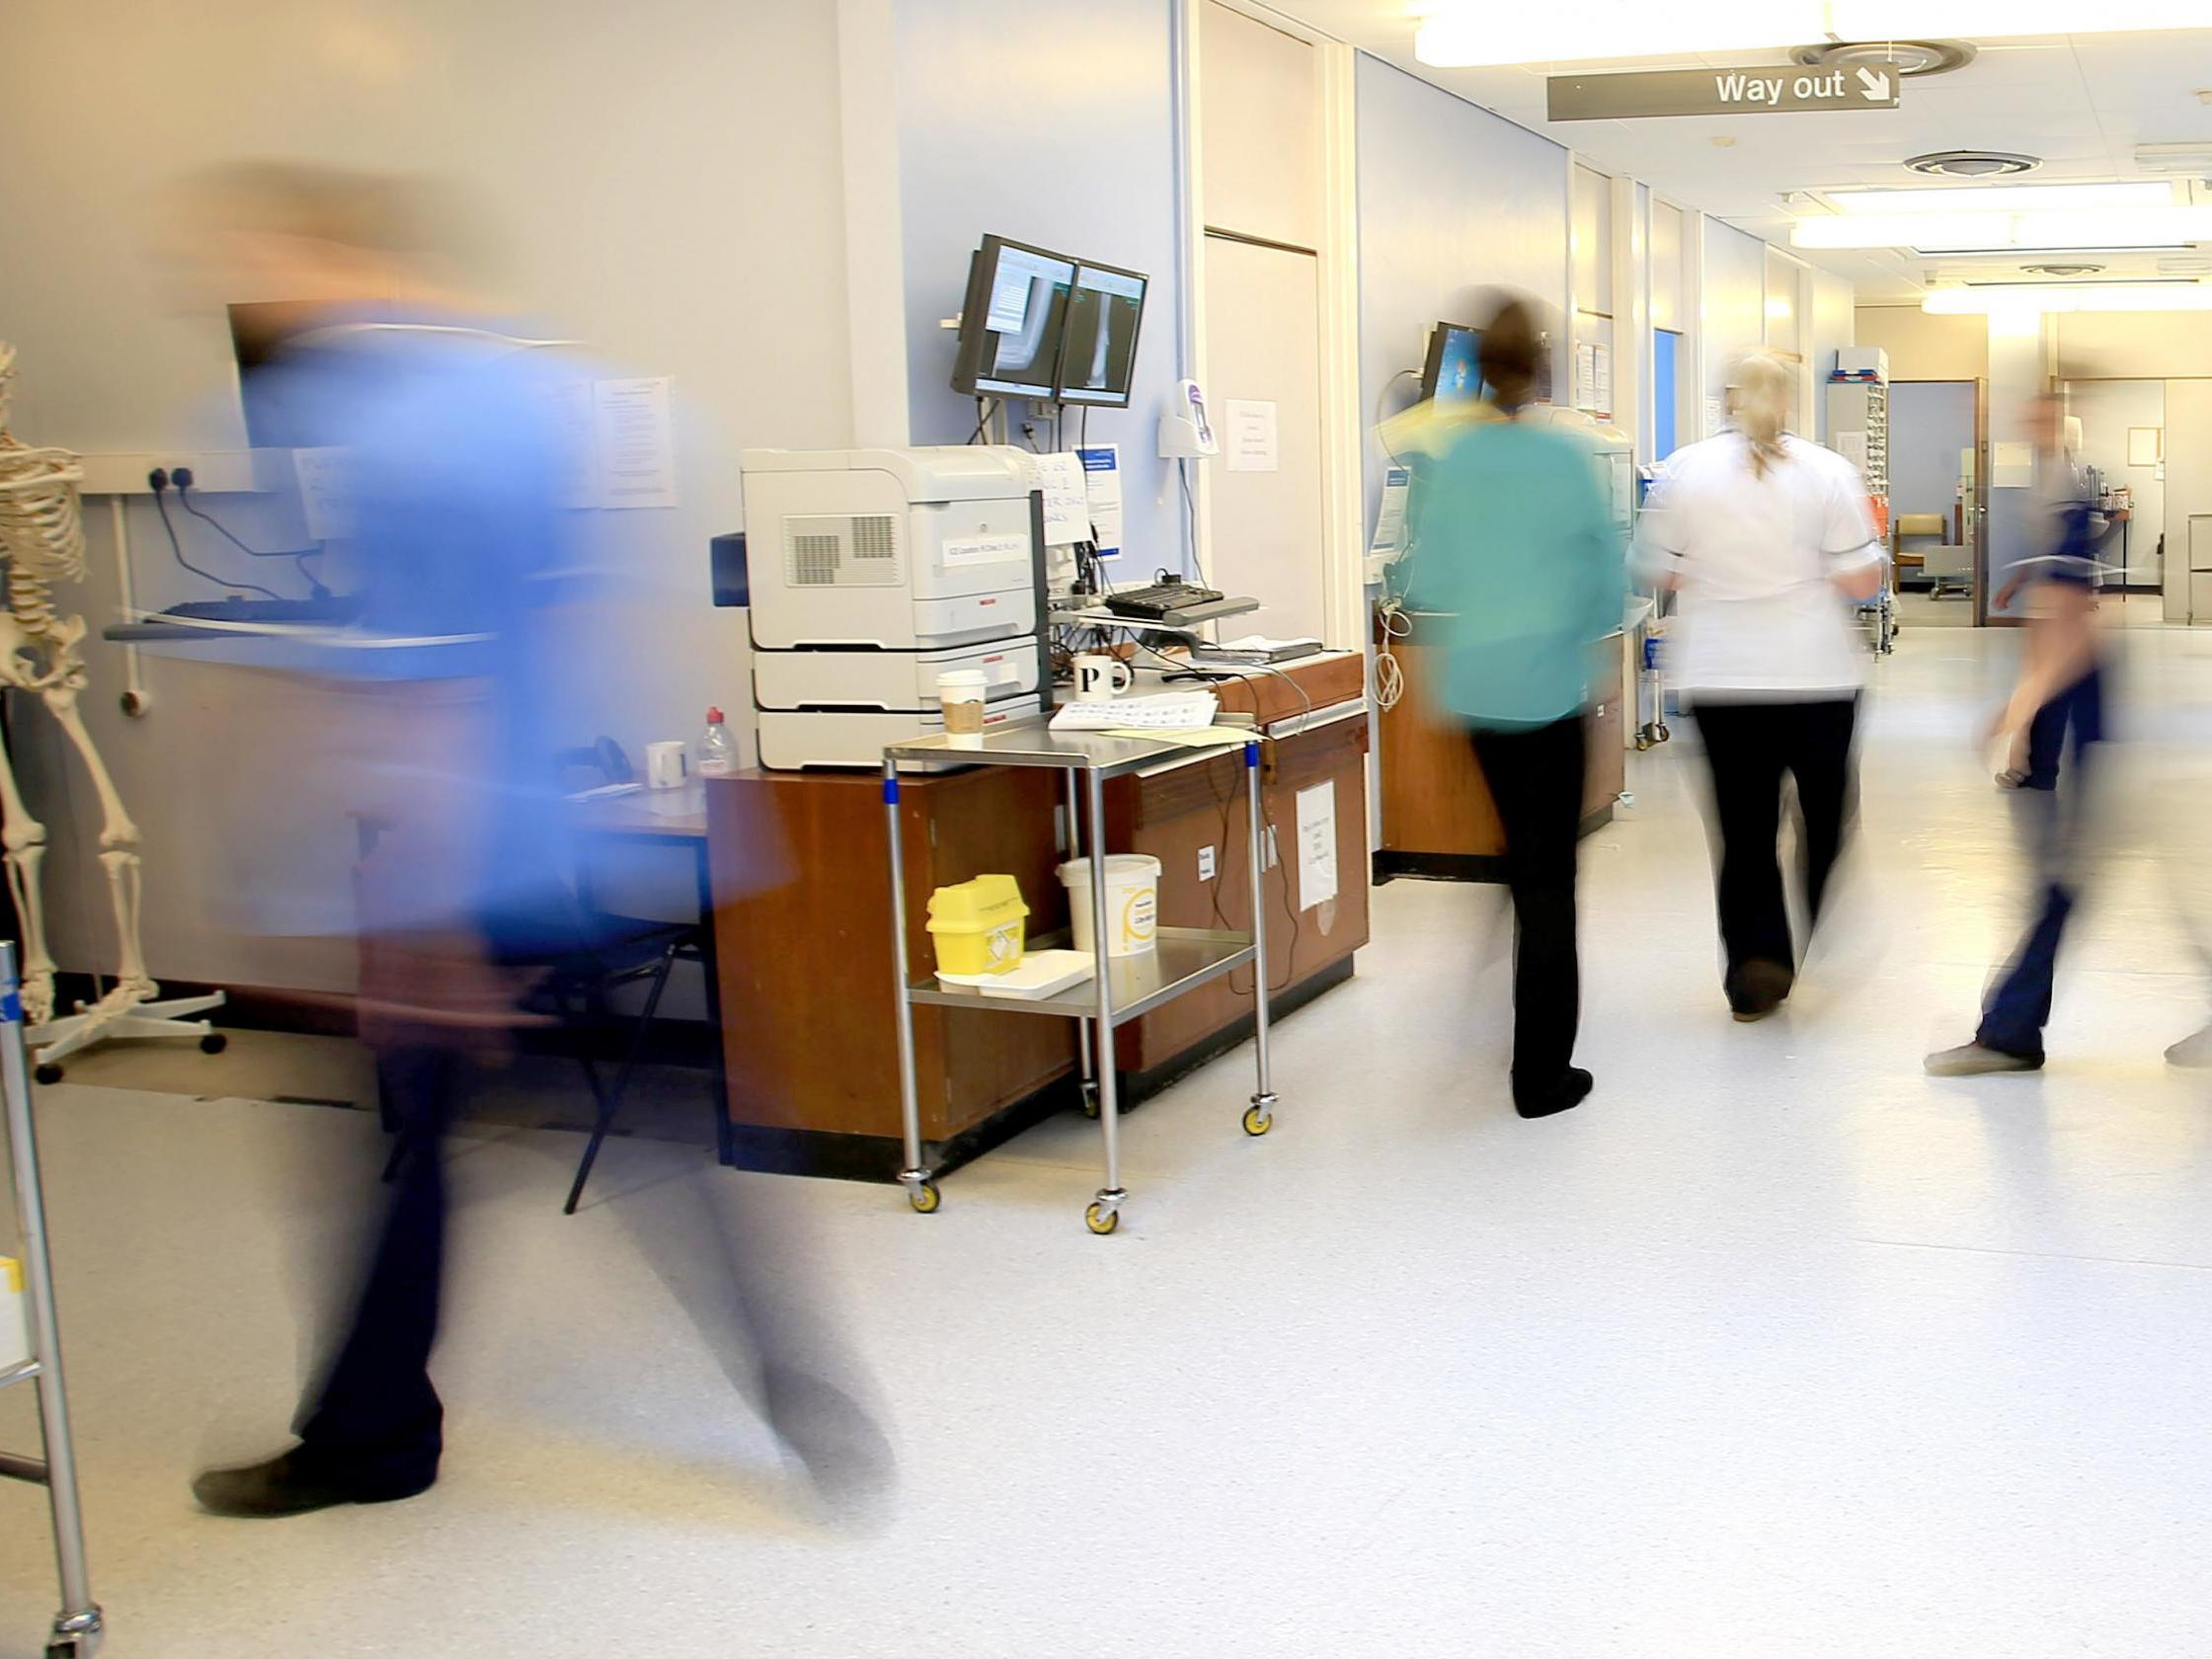 Mental health hospitals have been left out of promises to fund new NHS installations (File photo)